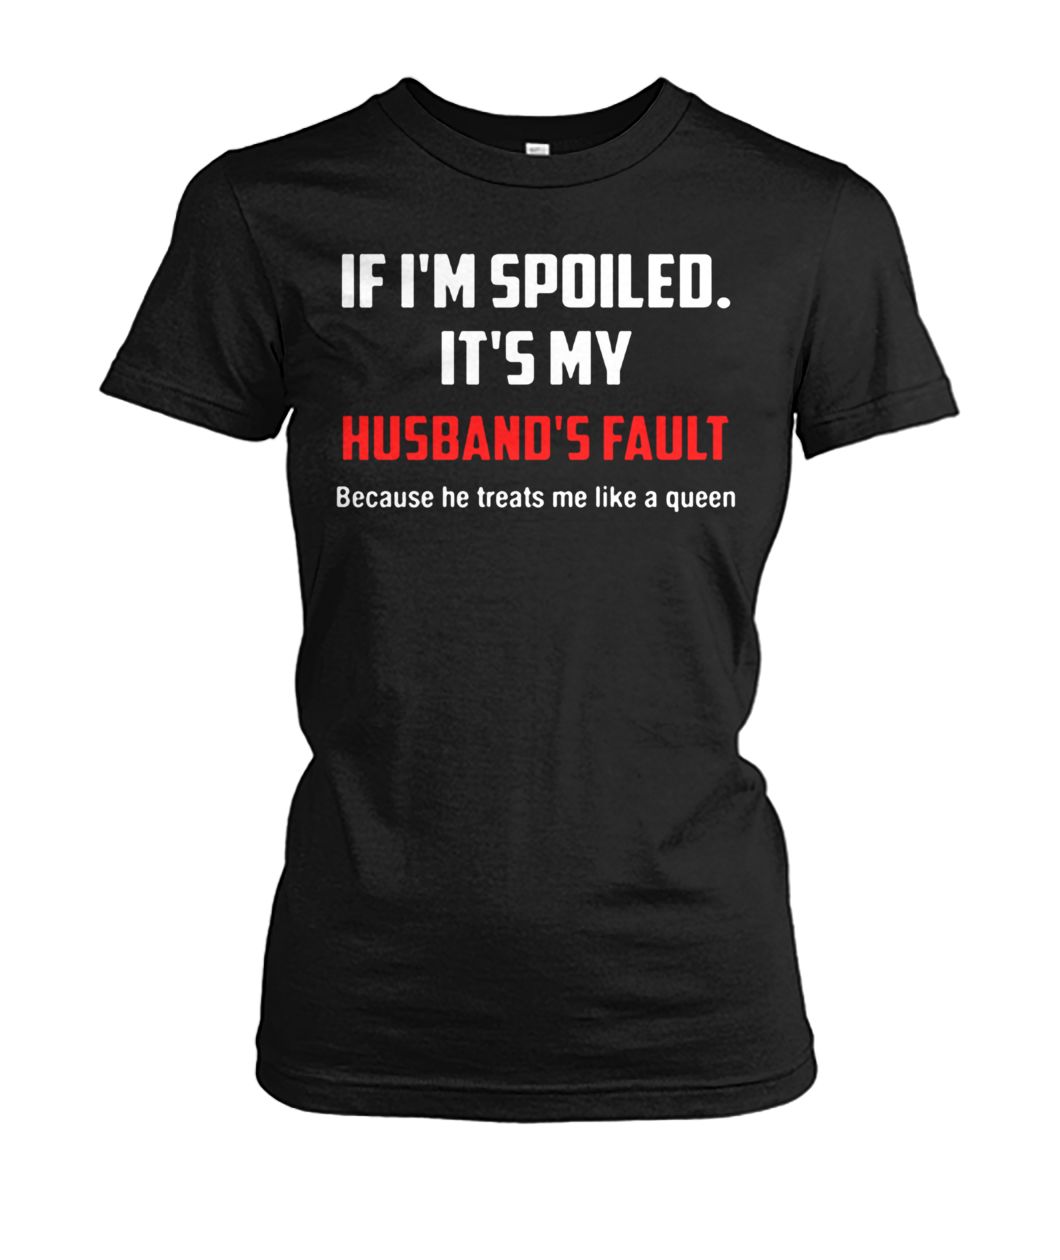 If I'm spoiled it's my husband's fault women's crew tee